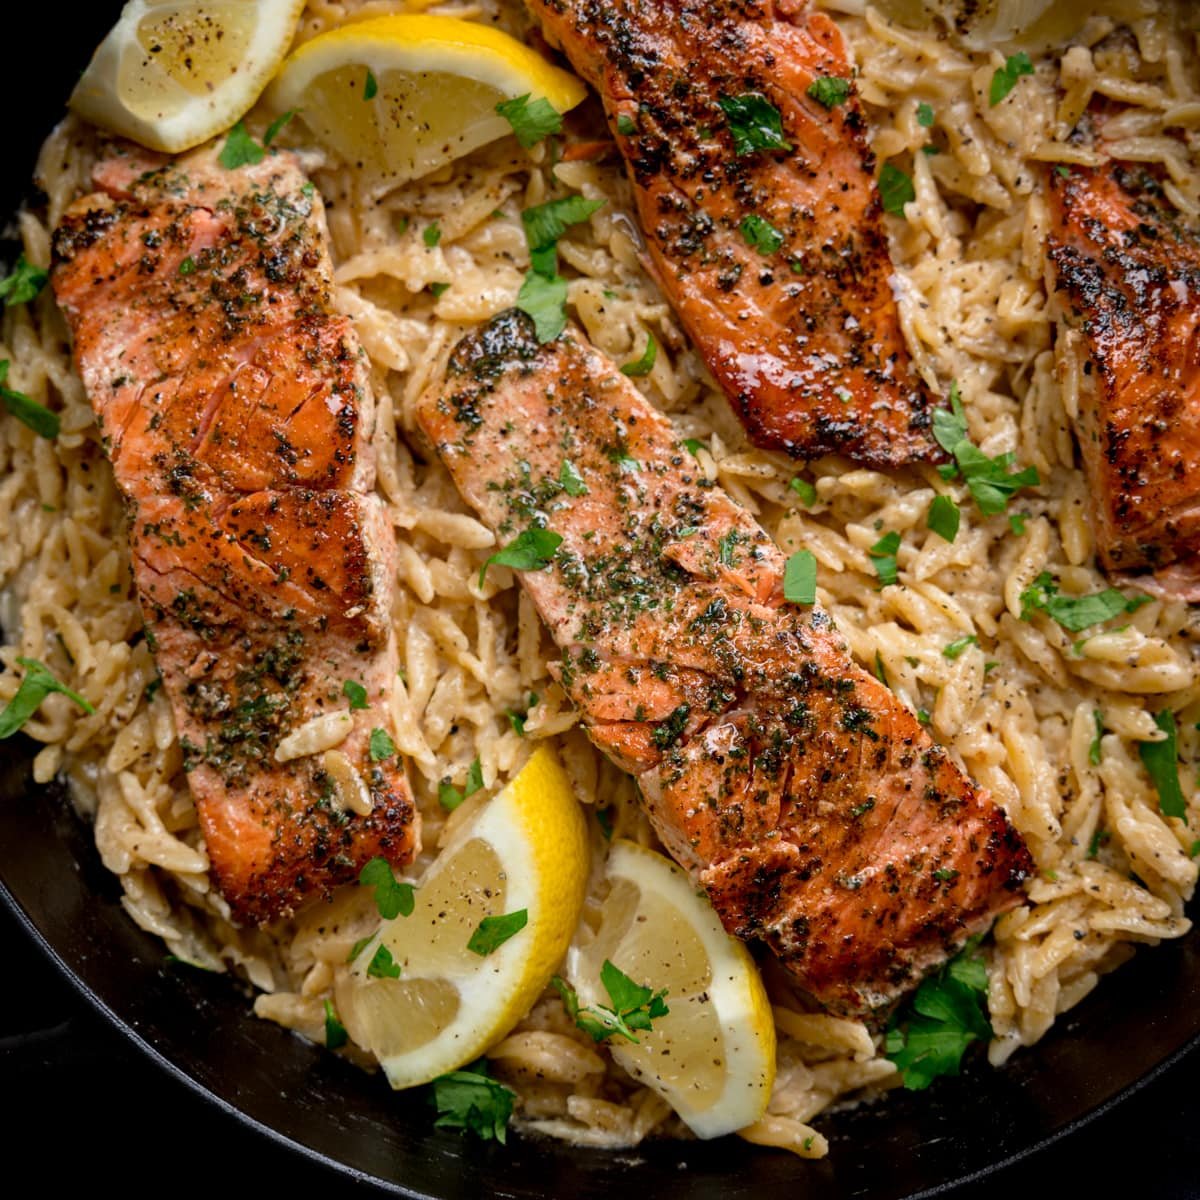 "Step-by-Step Guide to Making the Best Garlic Butter Salmon Recipe"